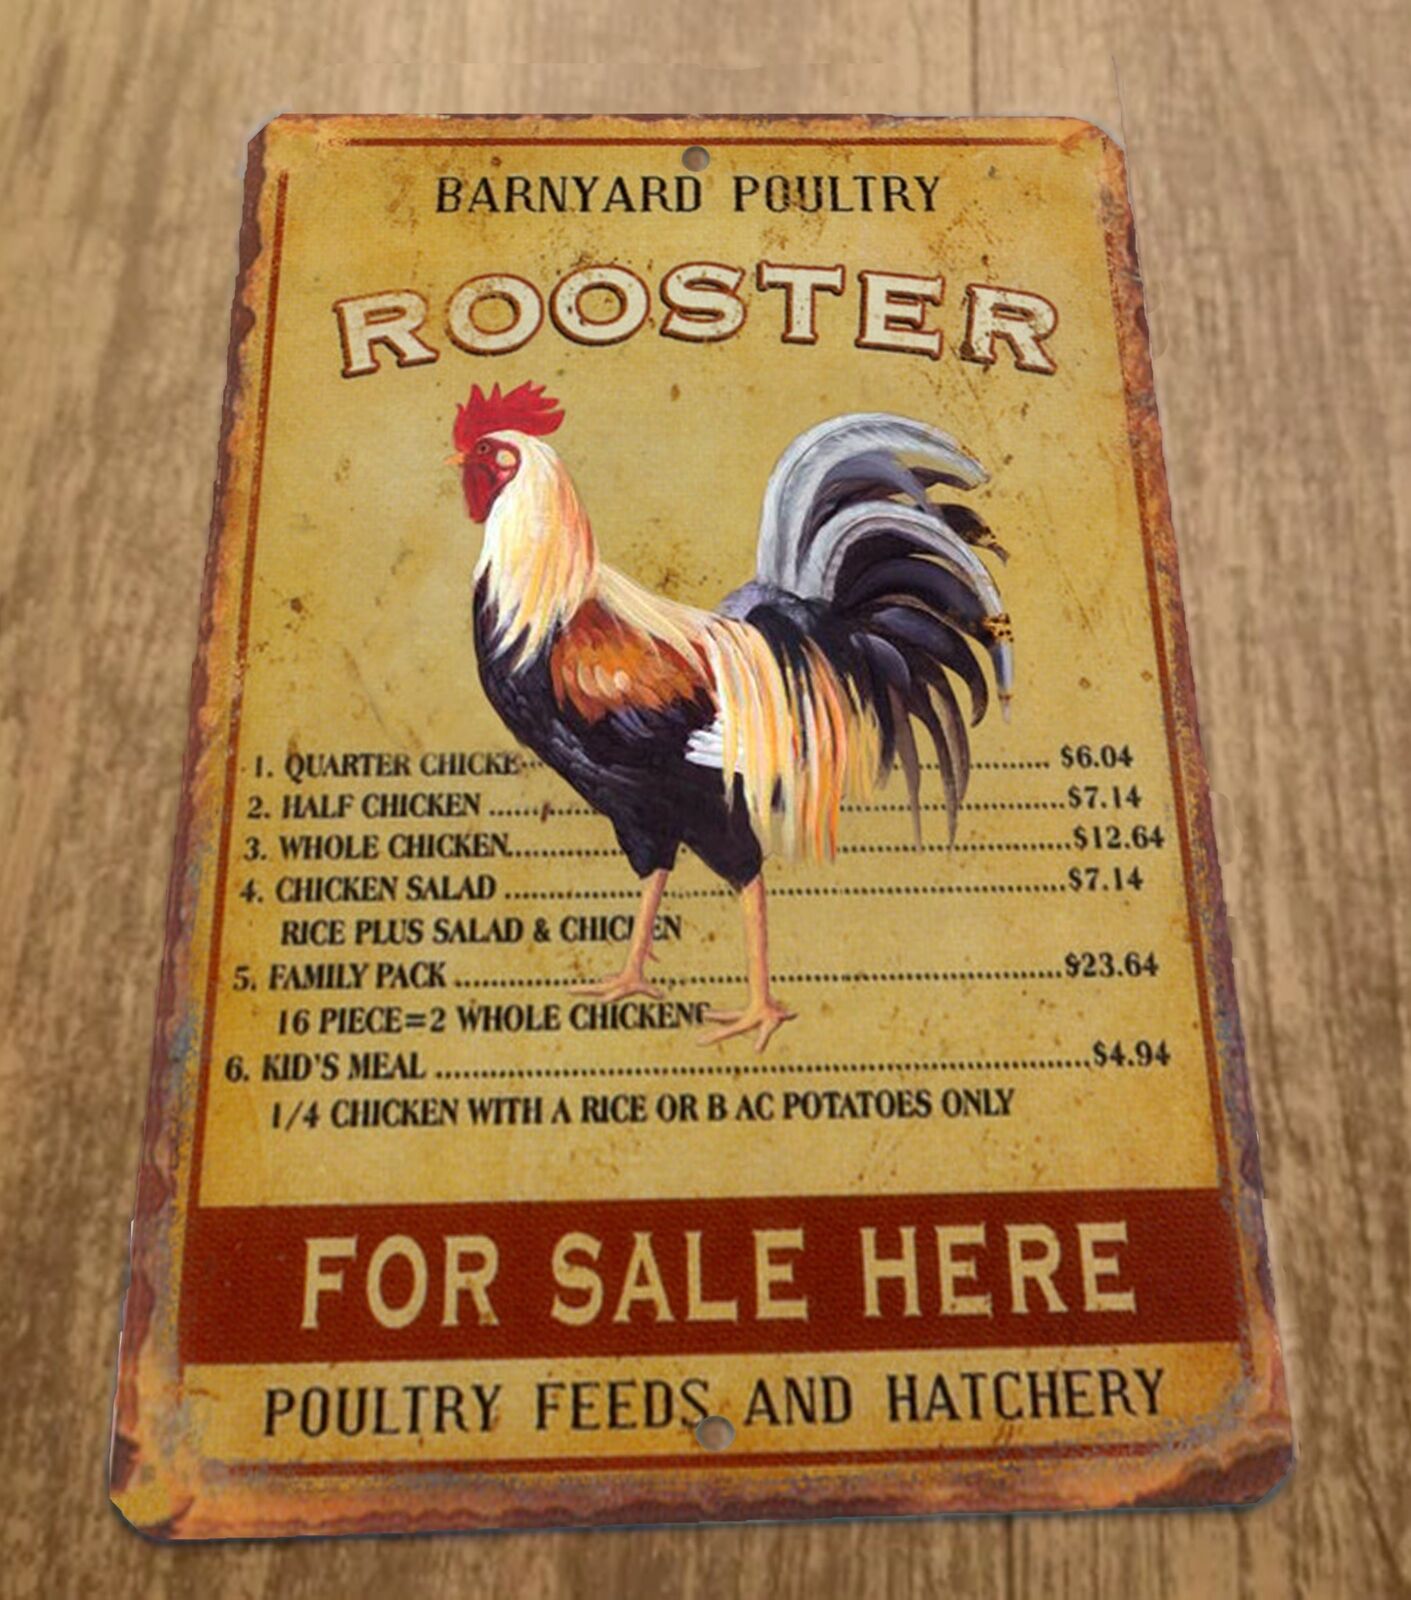 Barnyard Poultry Rooster For Sale Here 8x12 Metal Wall Animal Sign